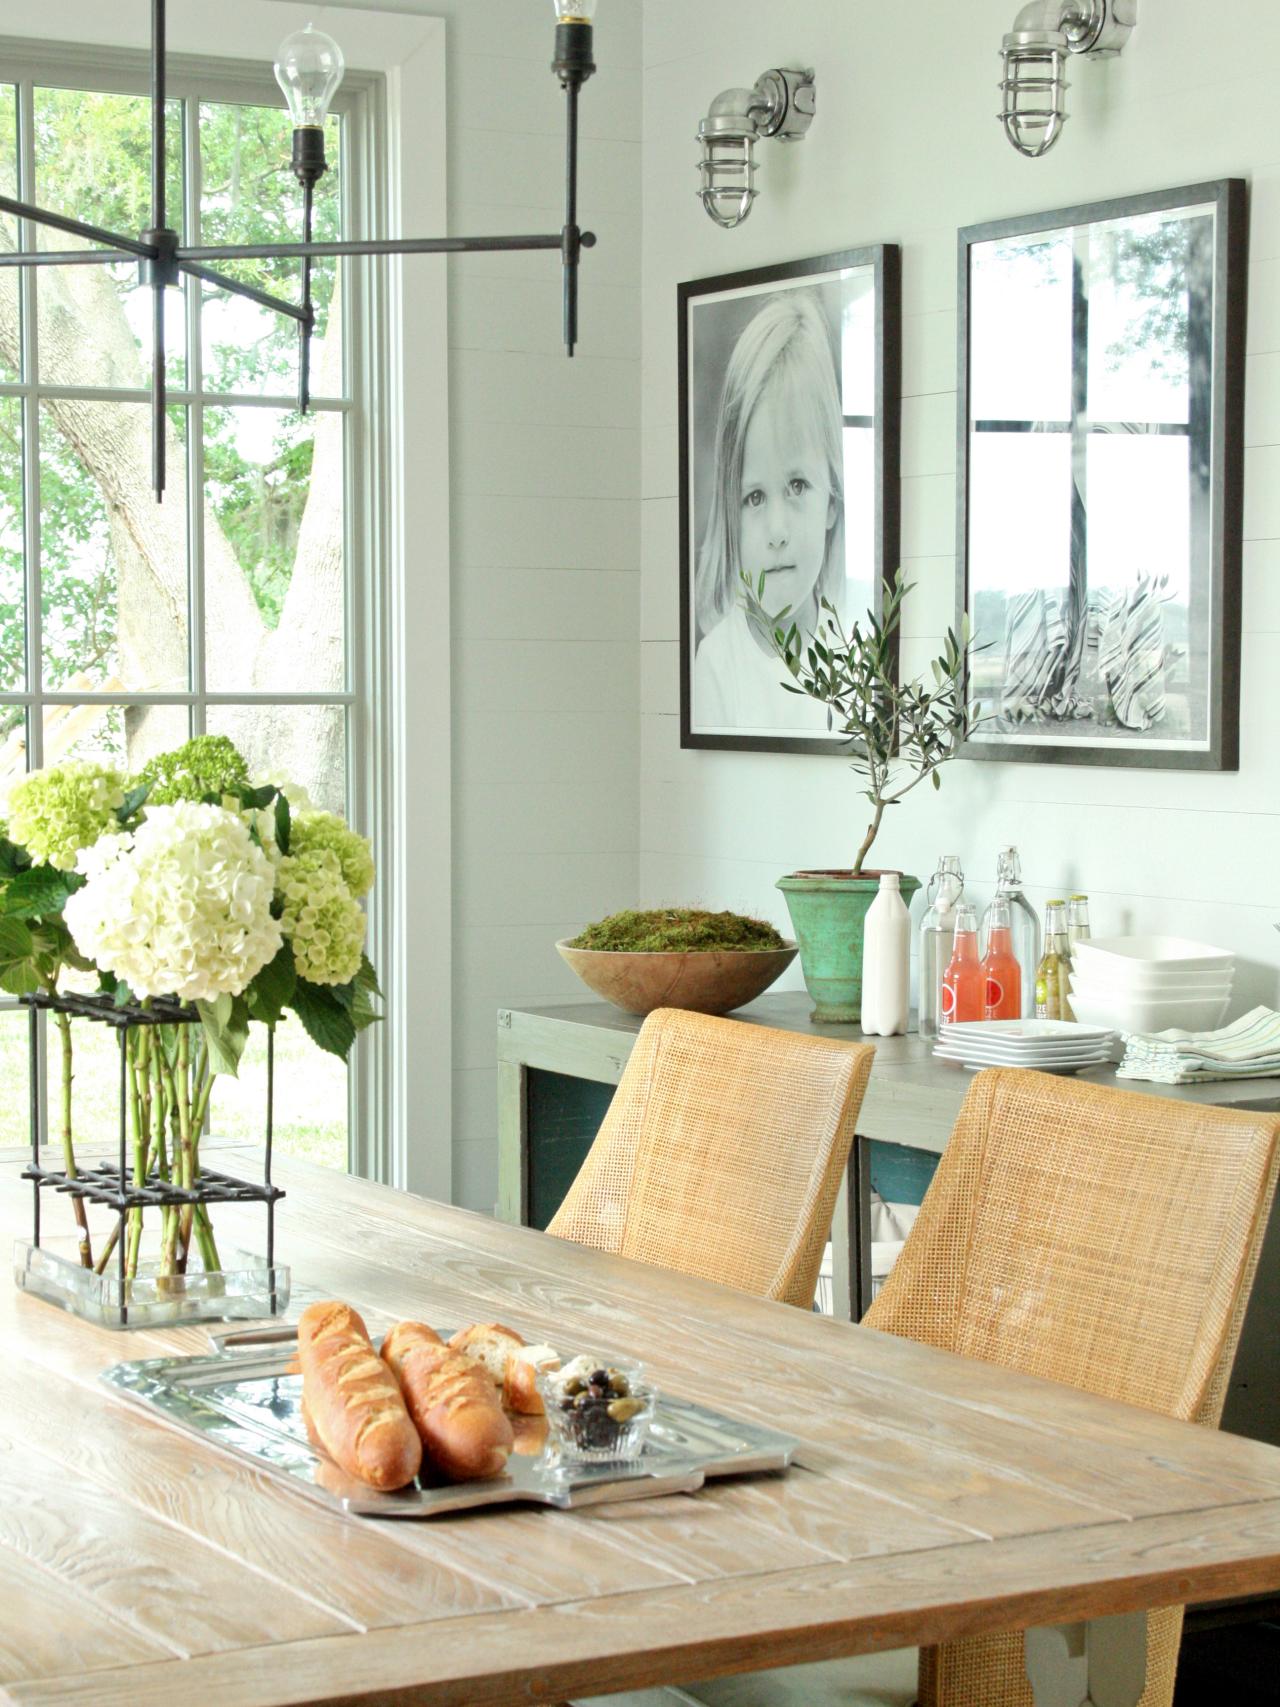 15 Ways to Dress Up Your Dining Room Walls HGTV's 